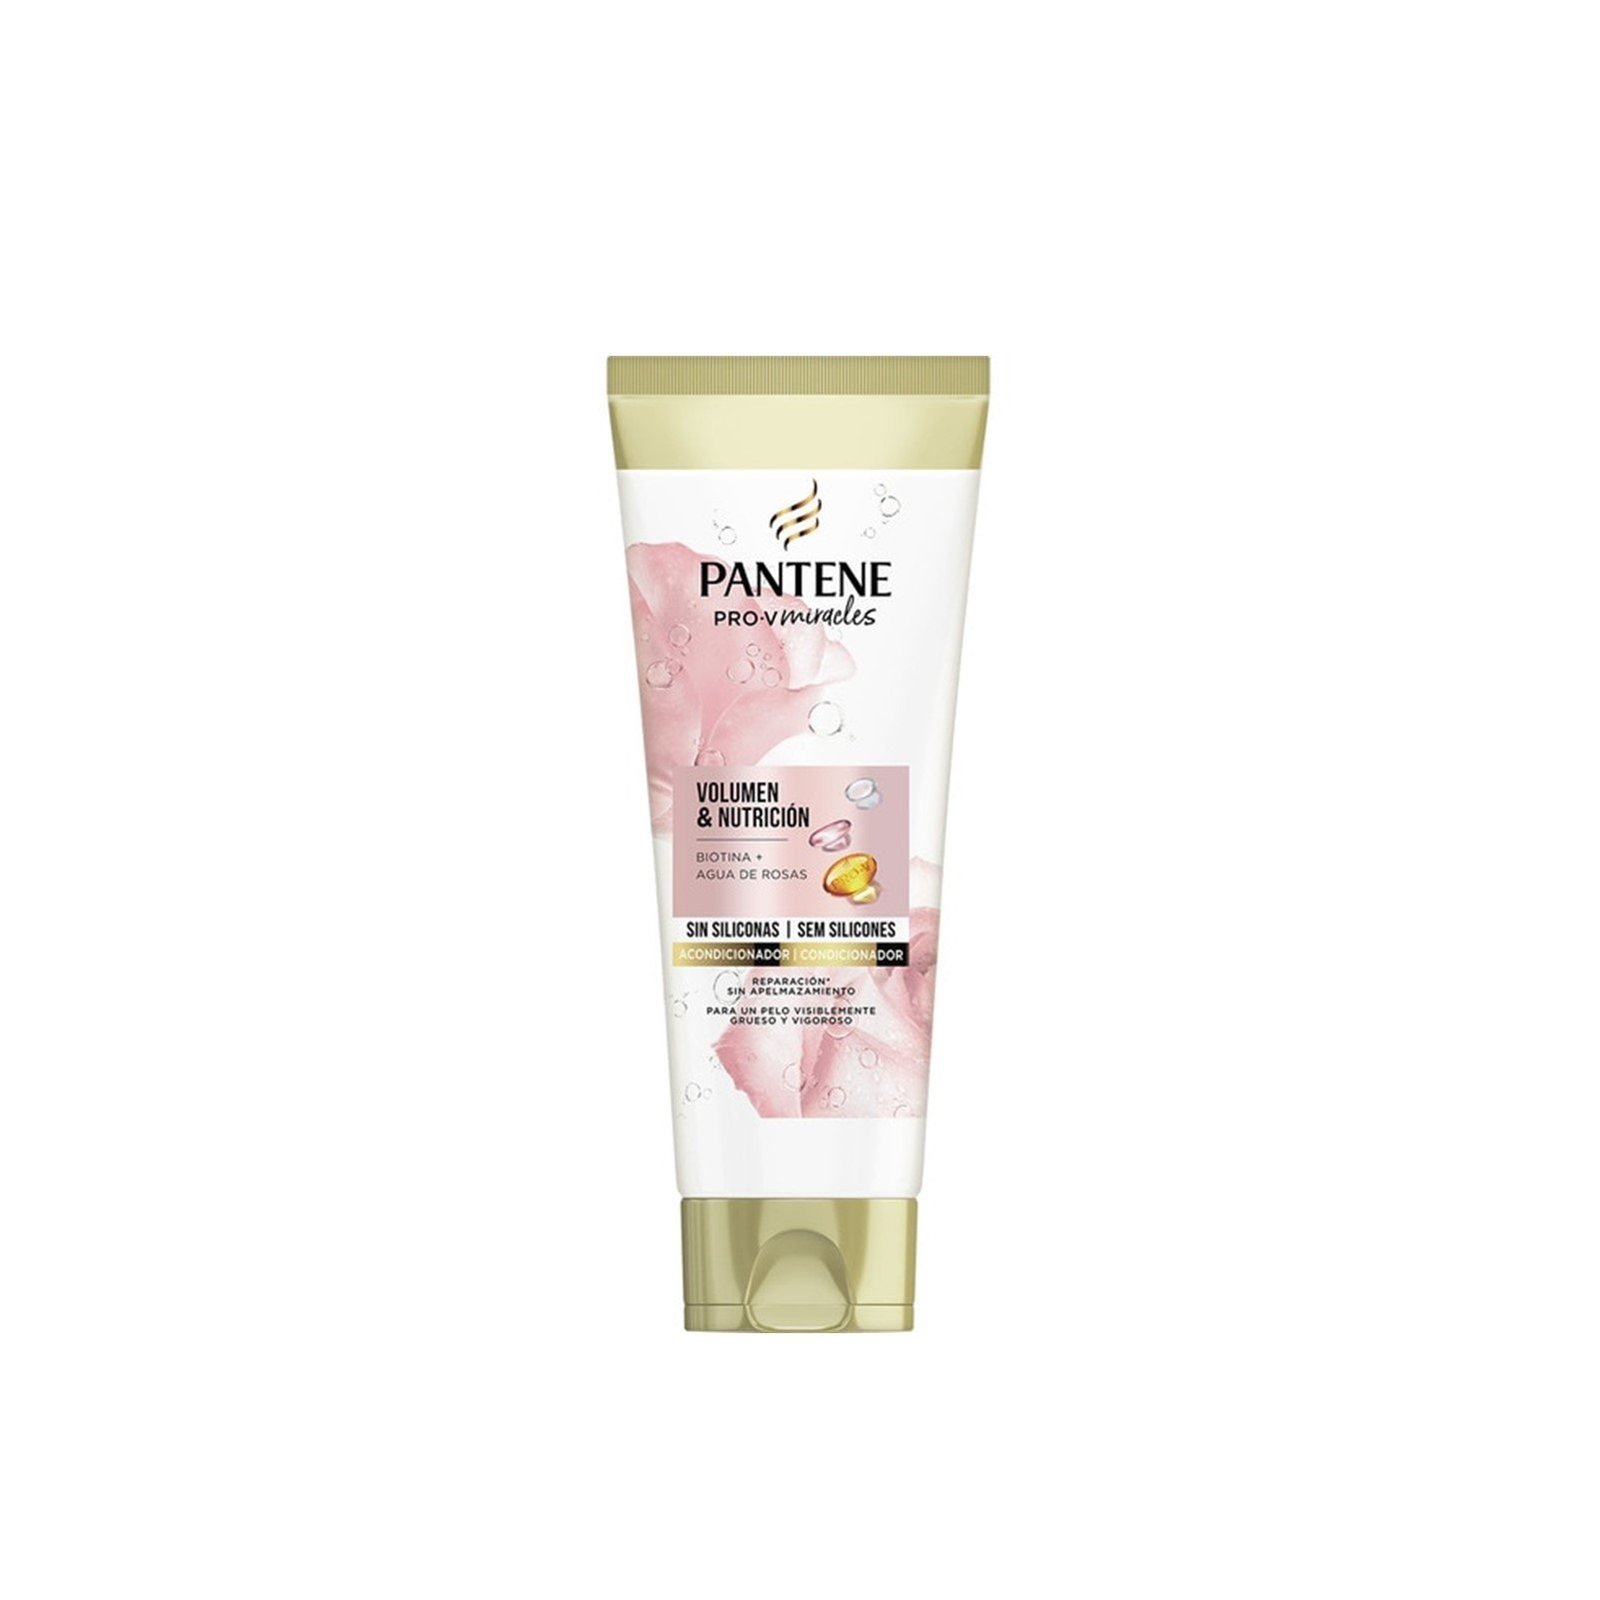 Pantene Pro-V Miracles Lift'n'Volume Silicone Free Conditioner 200ml (6.7 fl oz)